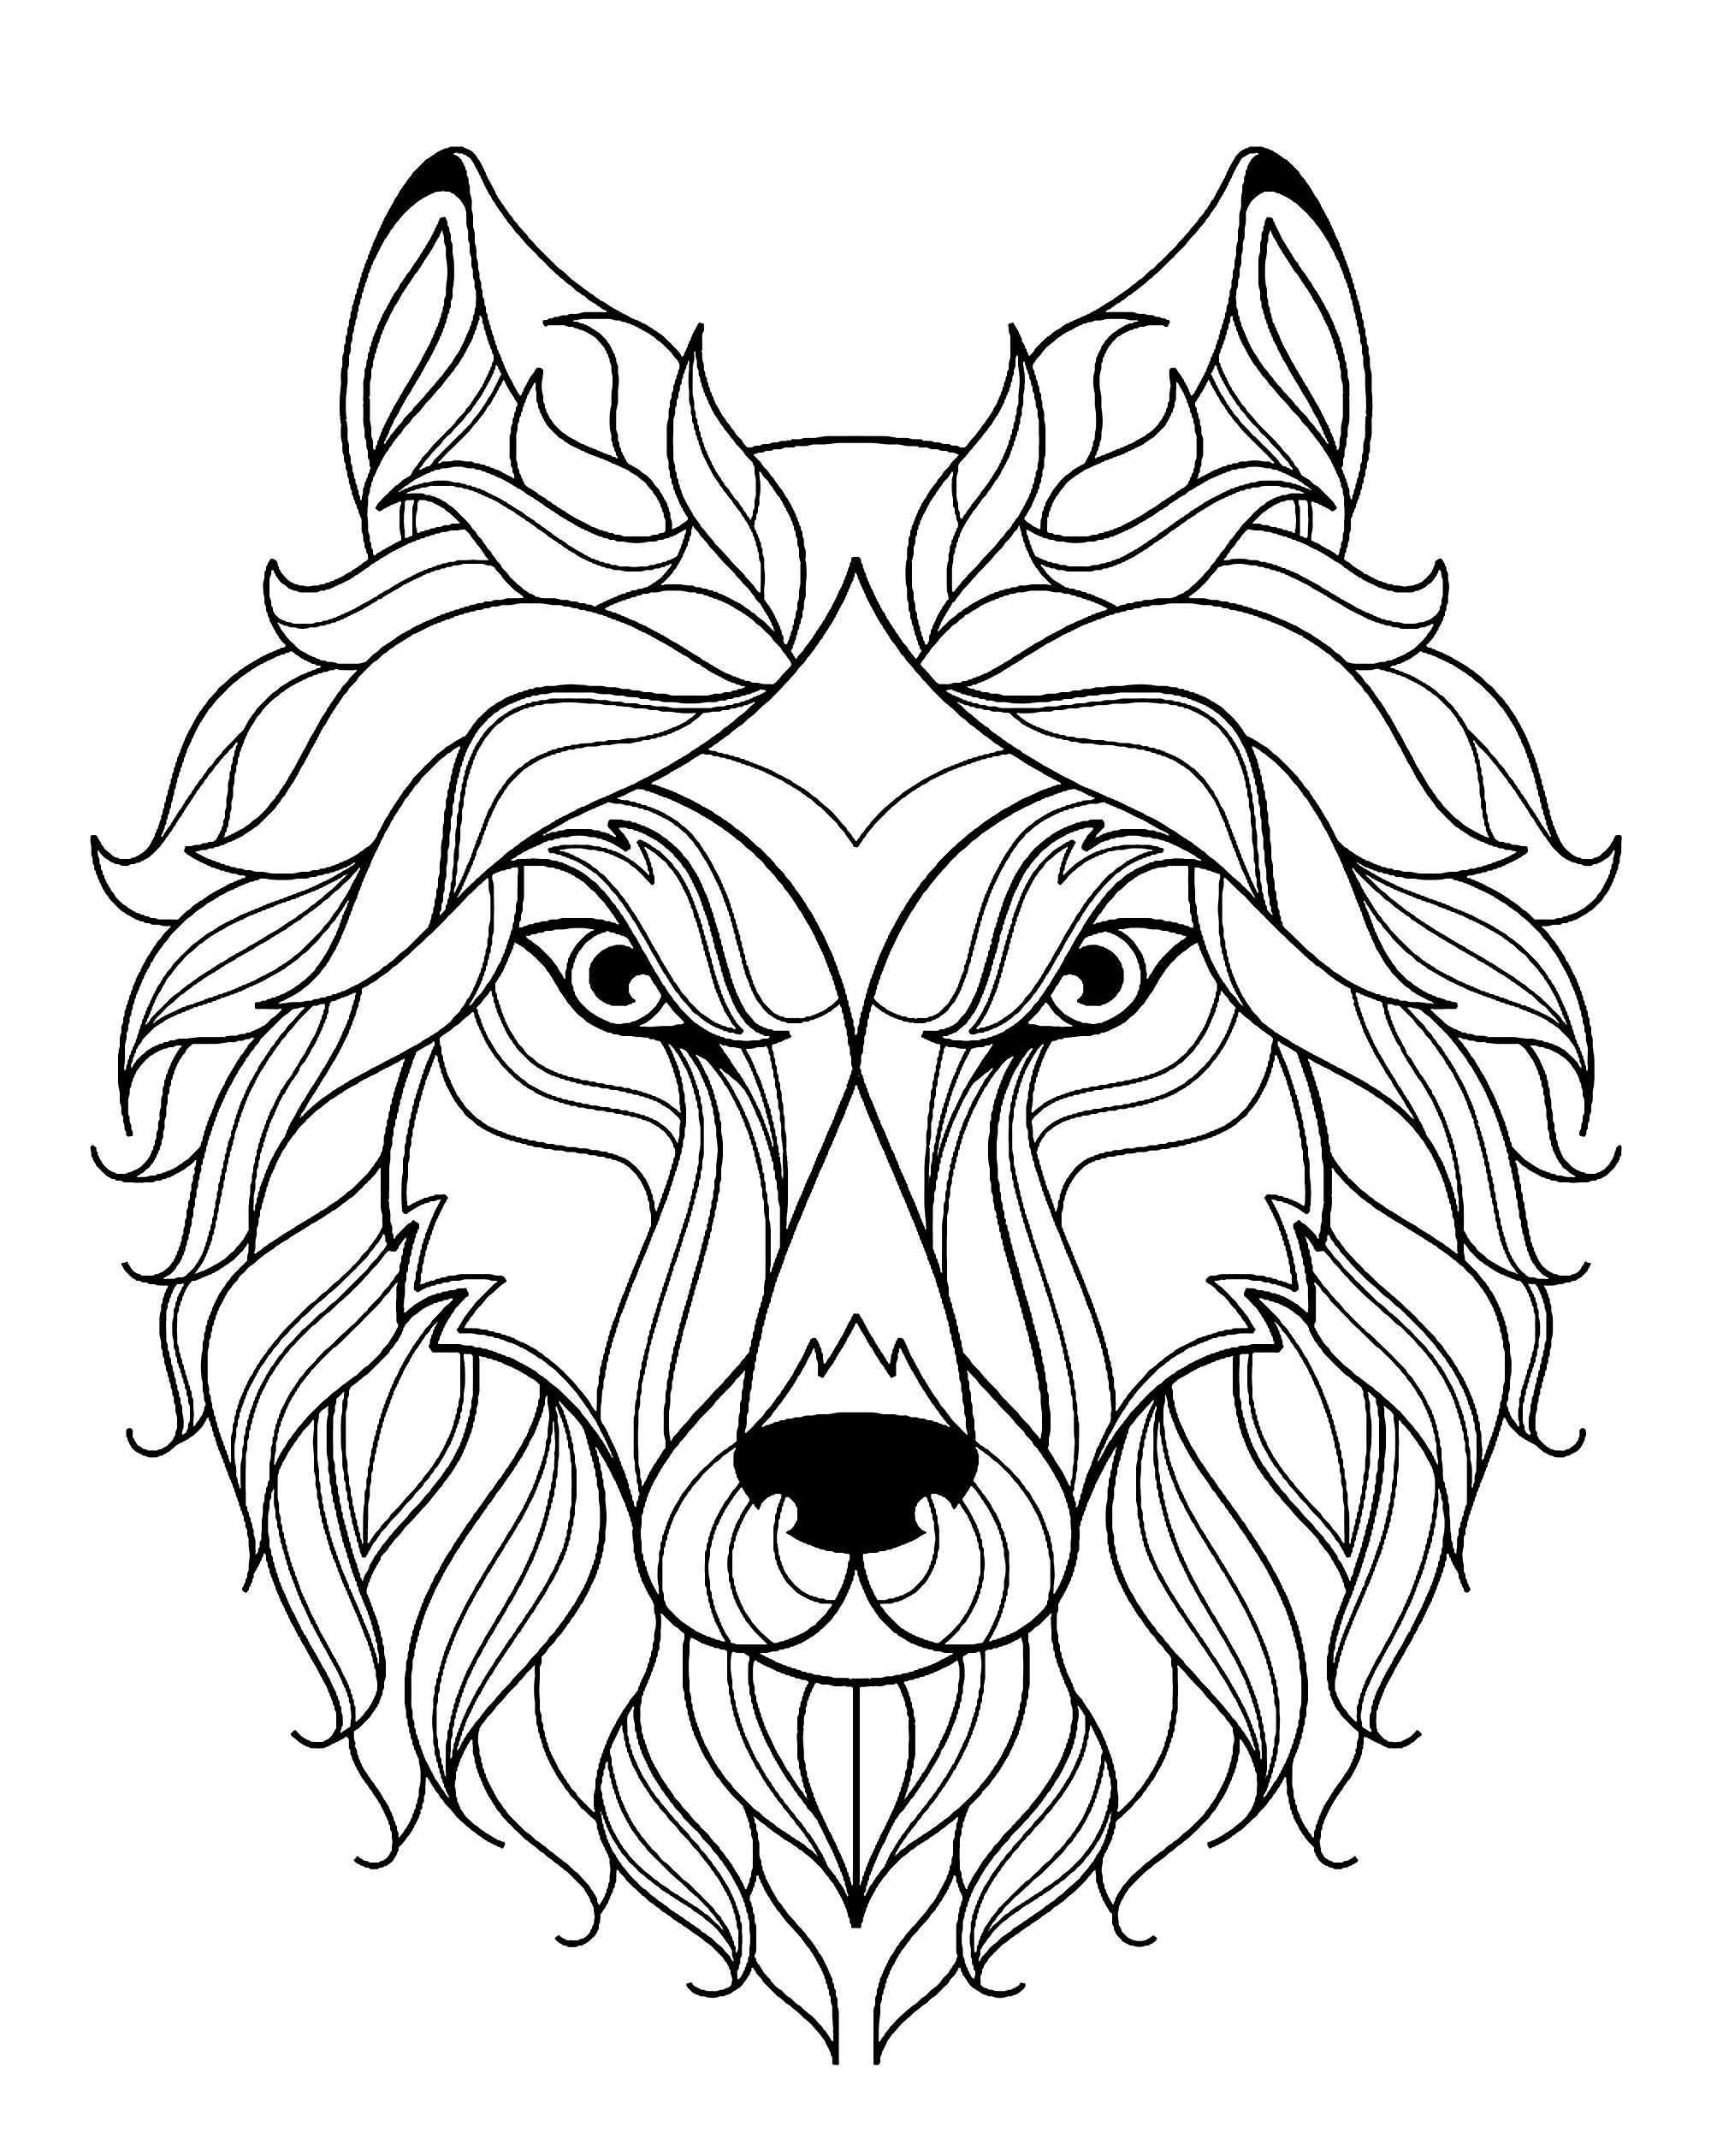 Simple Wolf coloring page to download for free, Artist : Алла-Глущенко   Source : 123rf